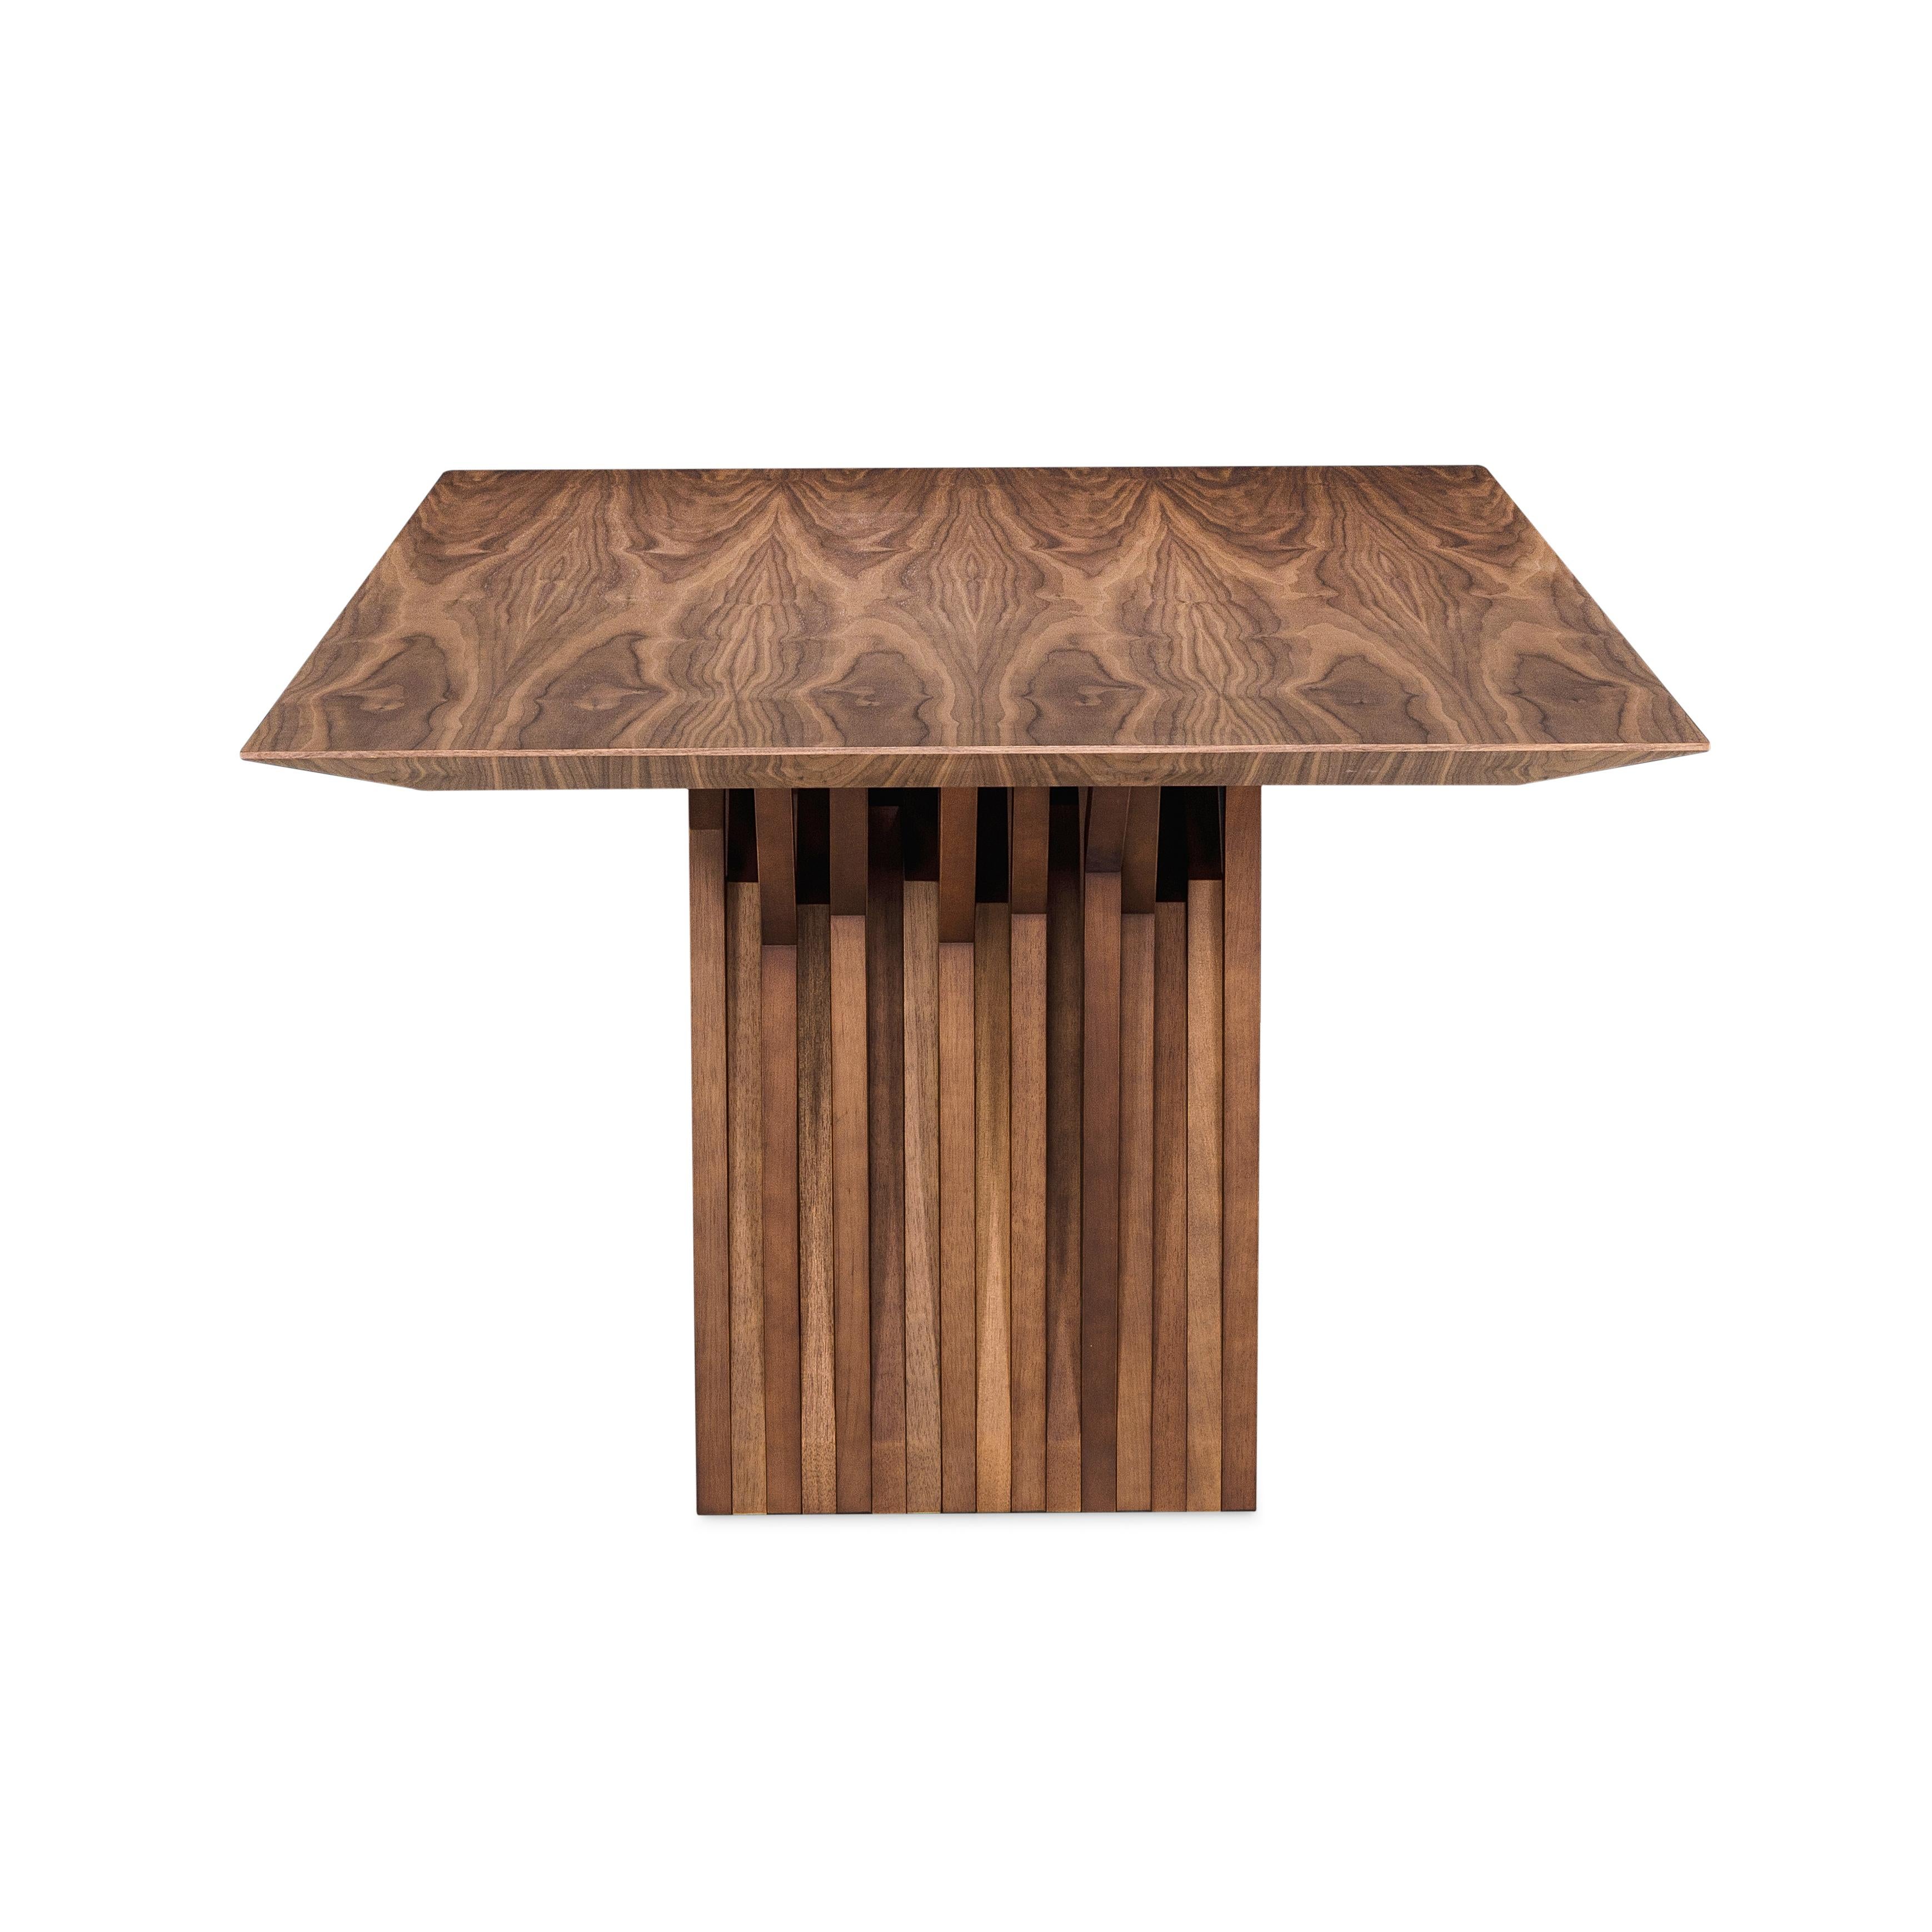 Brazilian Radi Dining Table with a Walnut Wood Veneered Table Top 78'' For Sale